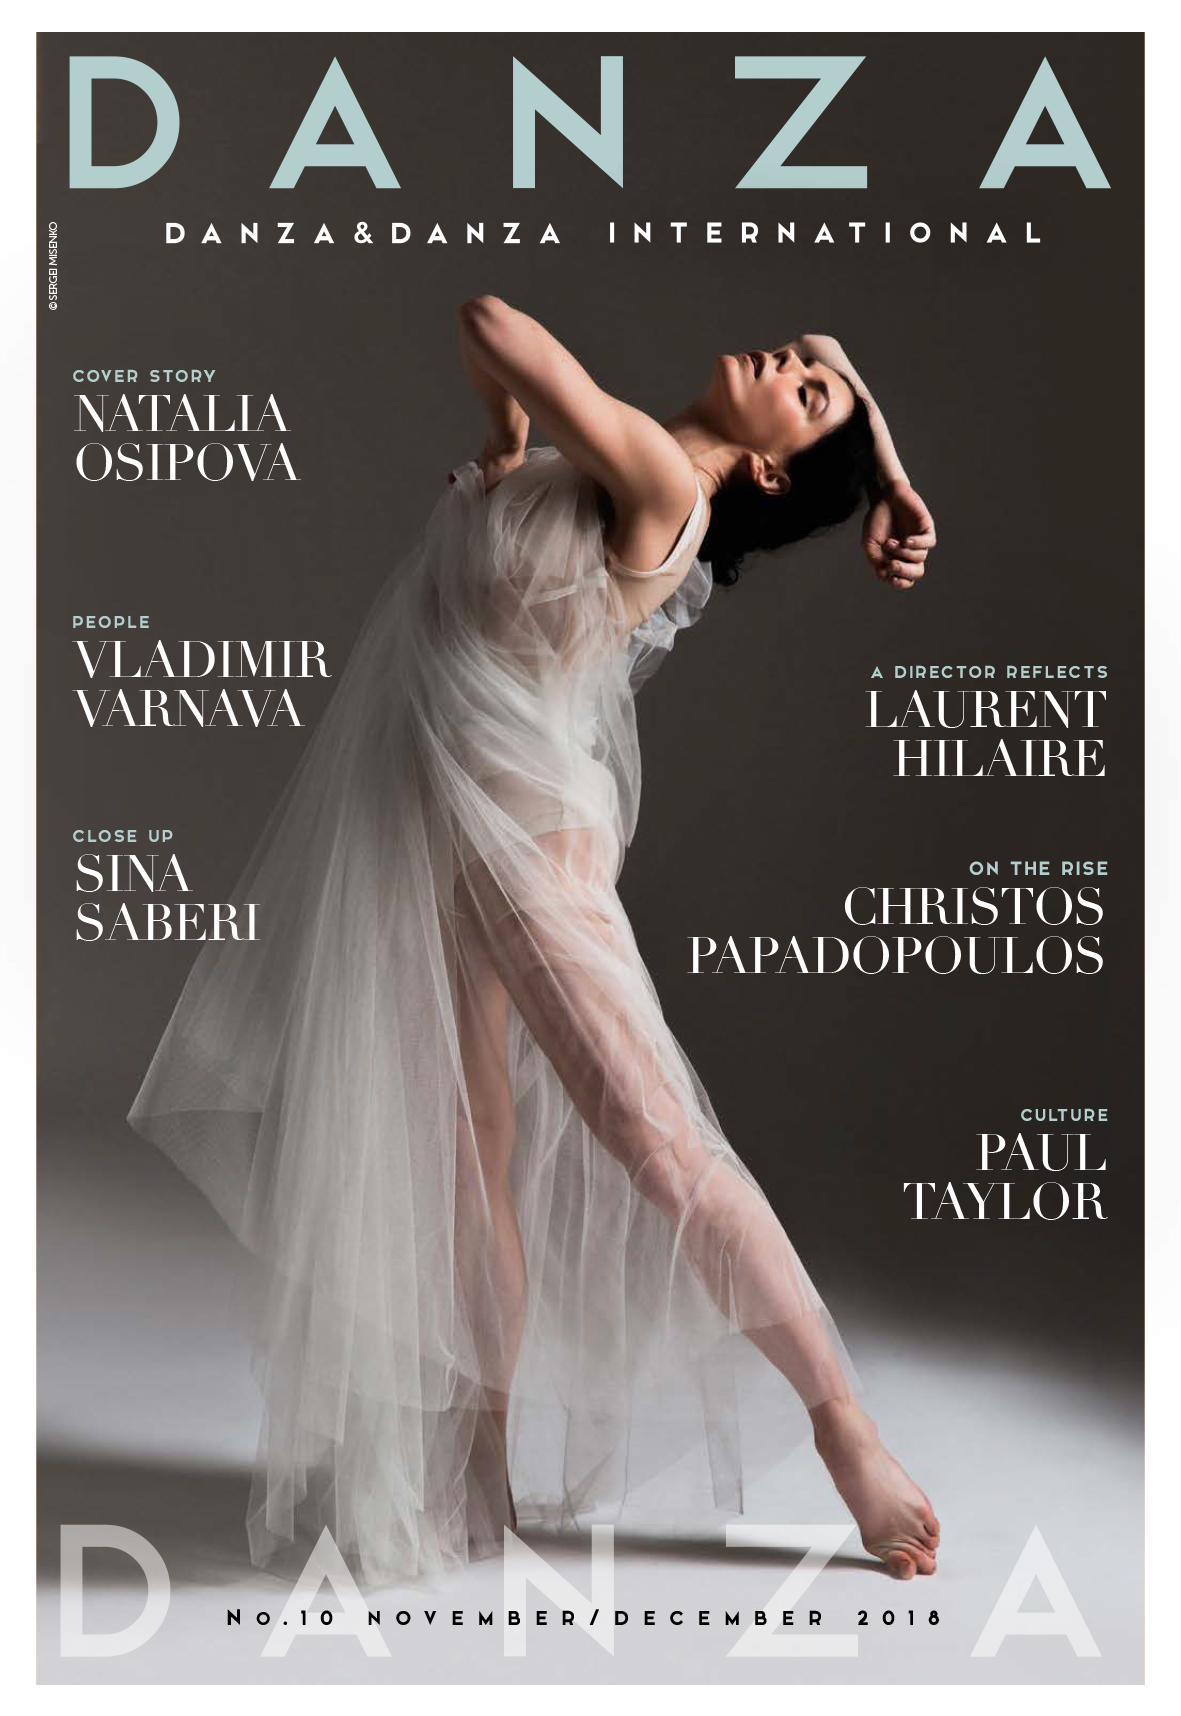 DANZA&DANZA International n. 10 is available now on the app